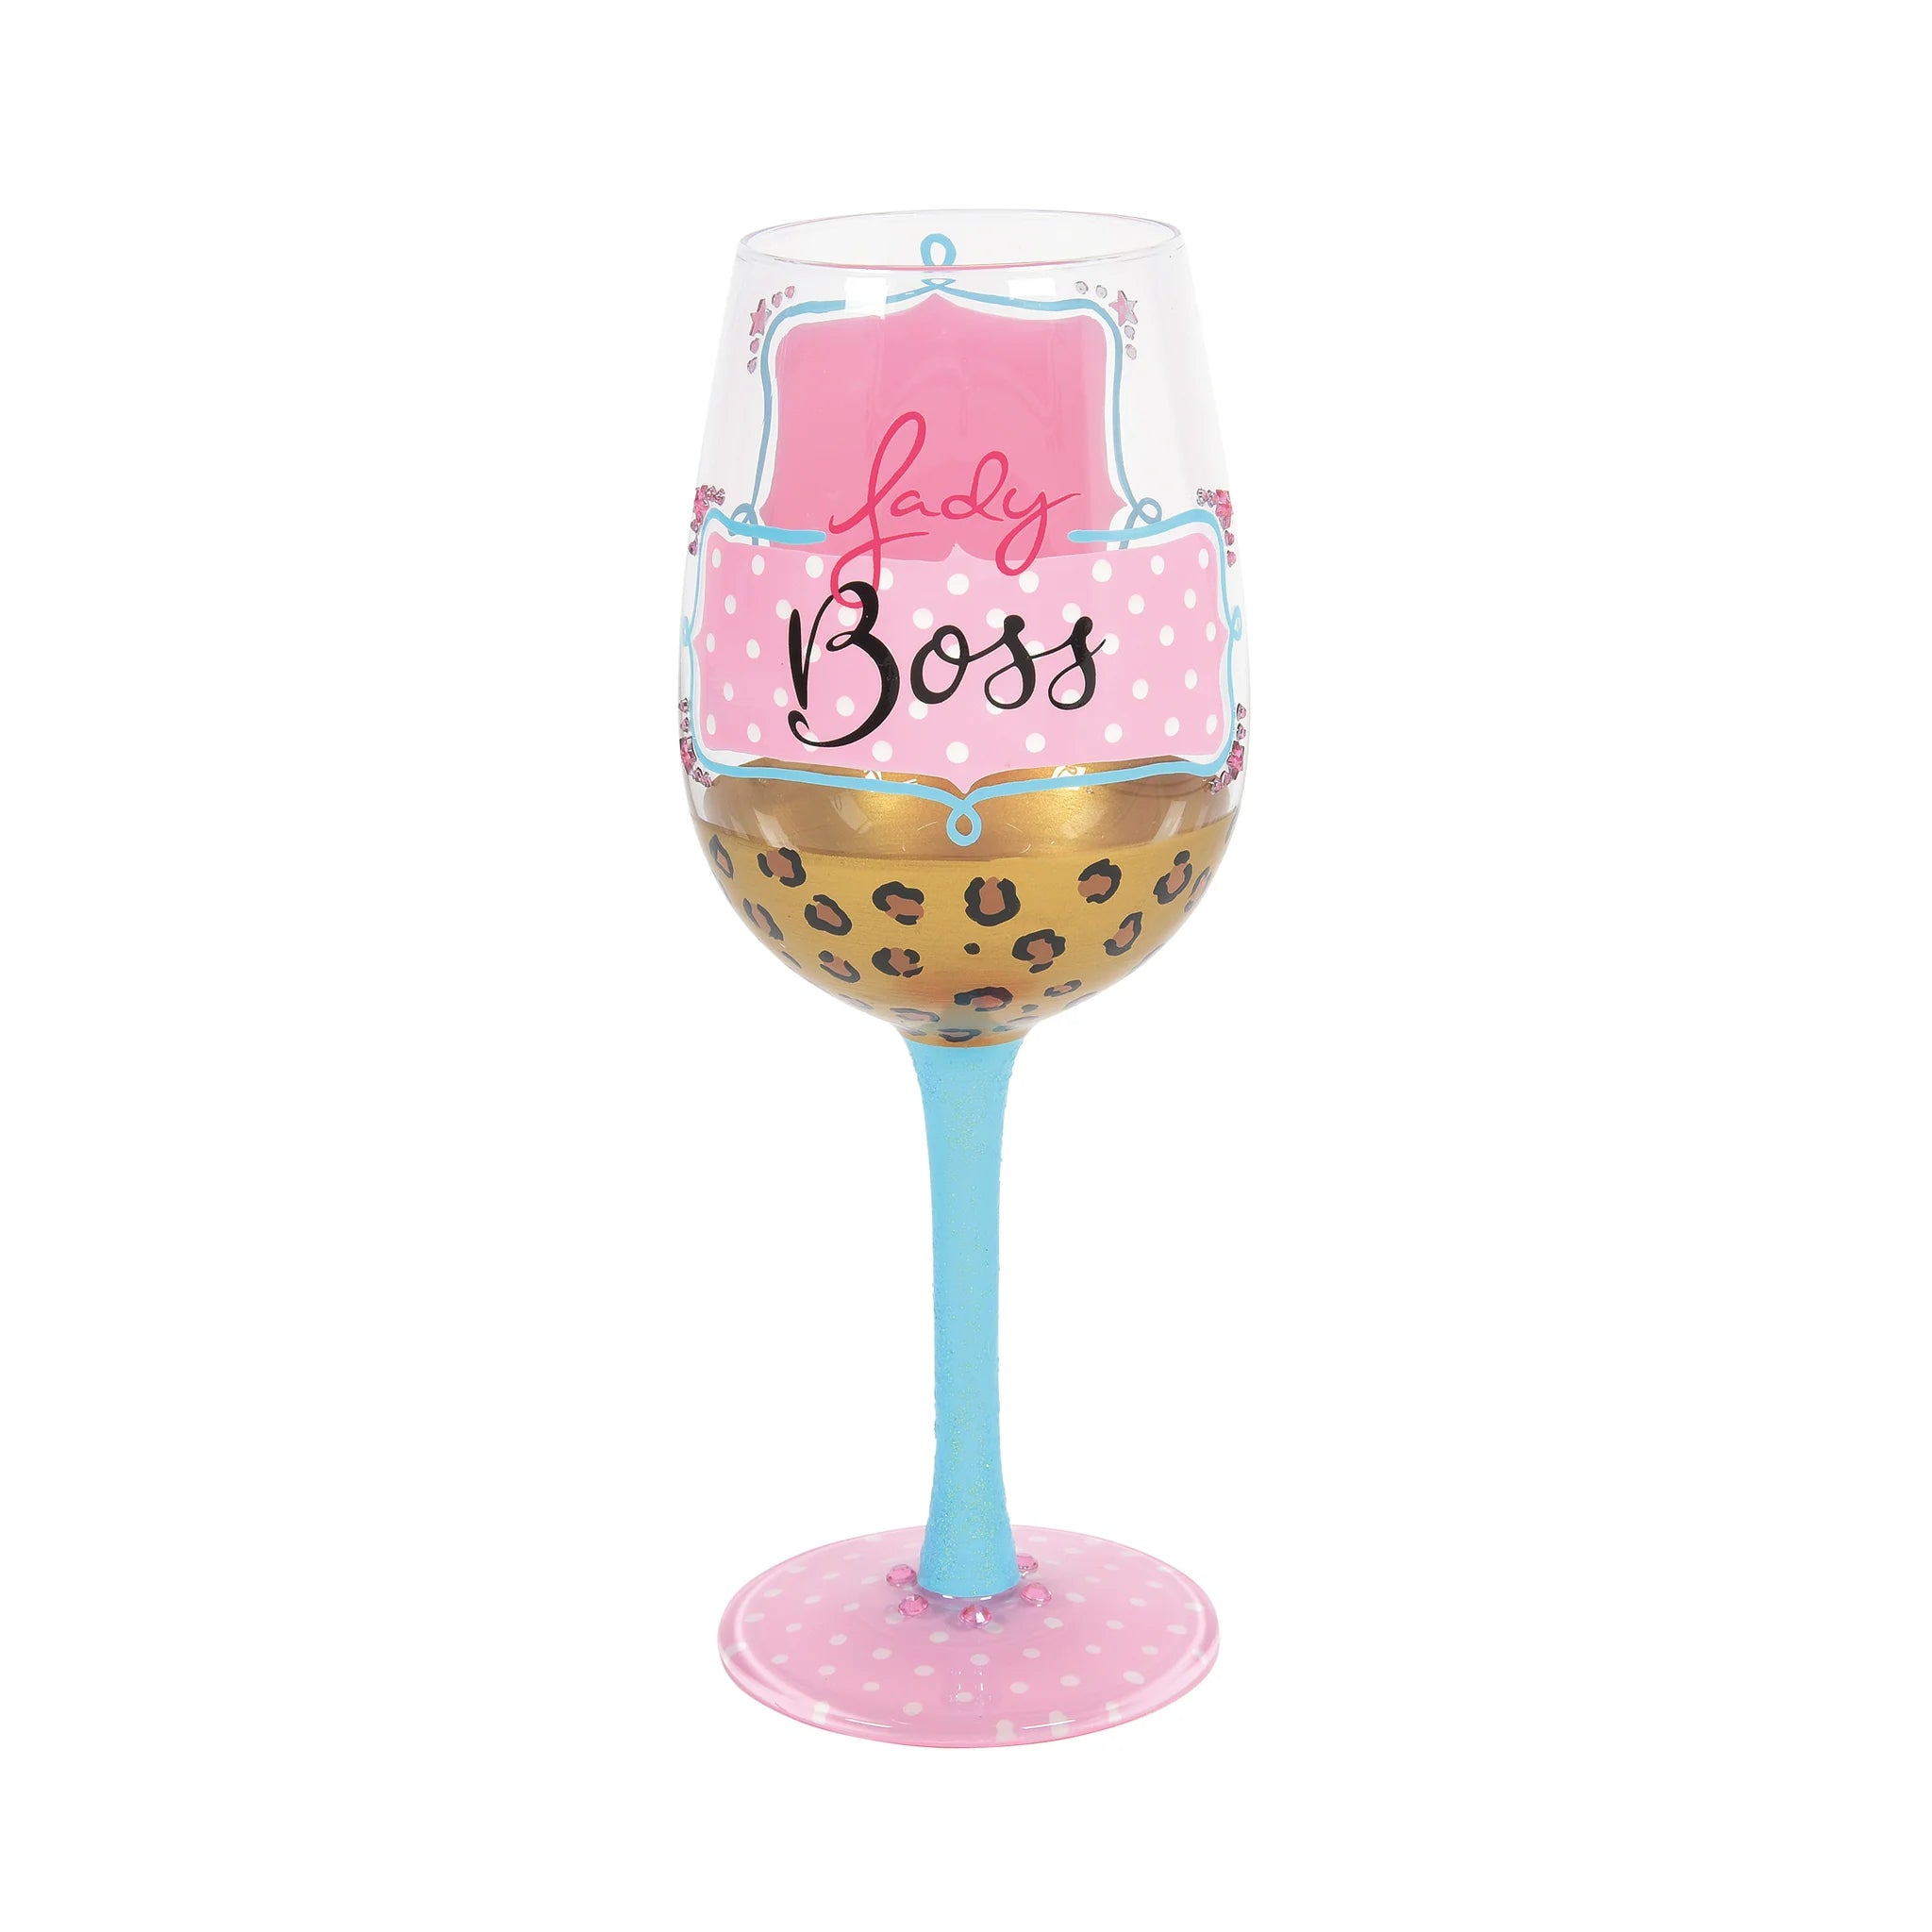 Hand Painted Lady Boss Stemmed Wine Glass